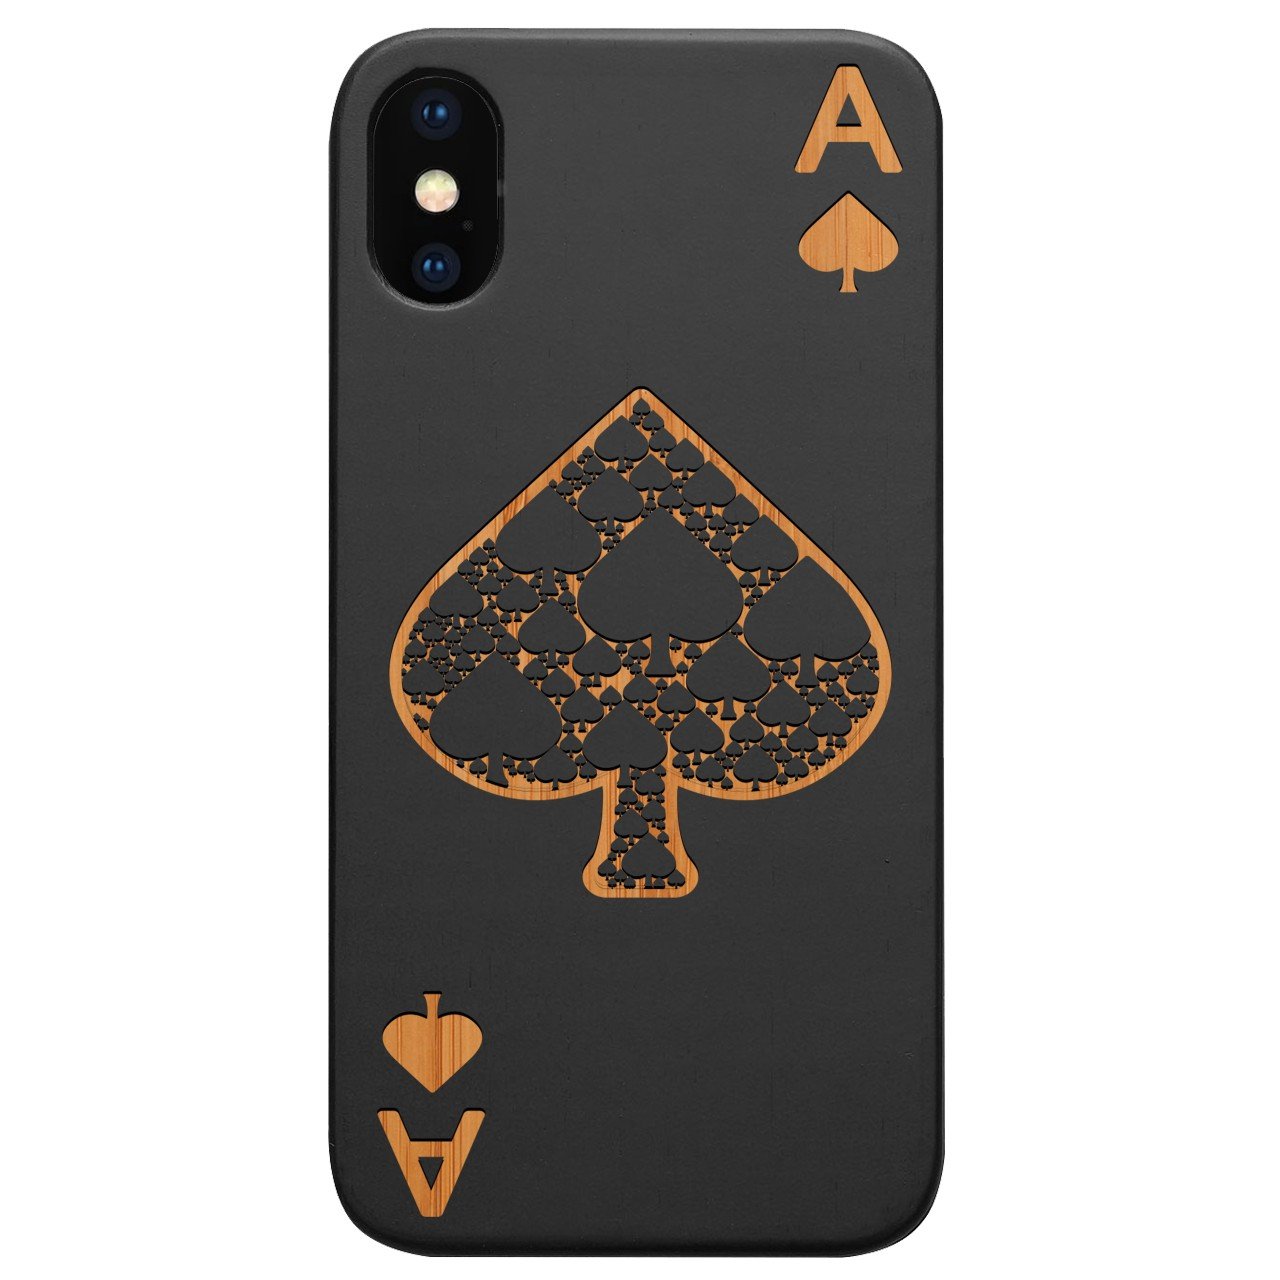 Ace of Spades - Engraved - Wooden Phone Case